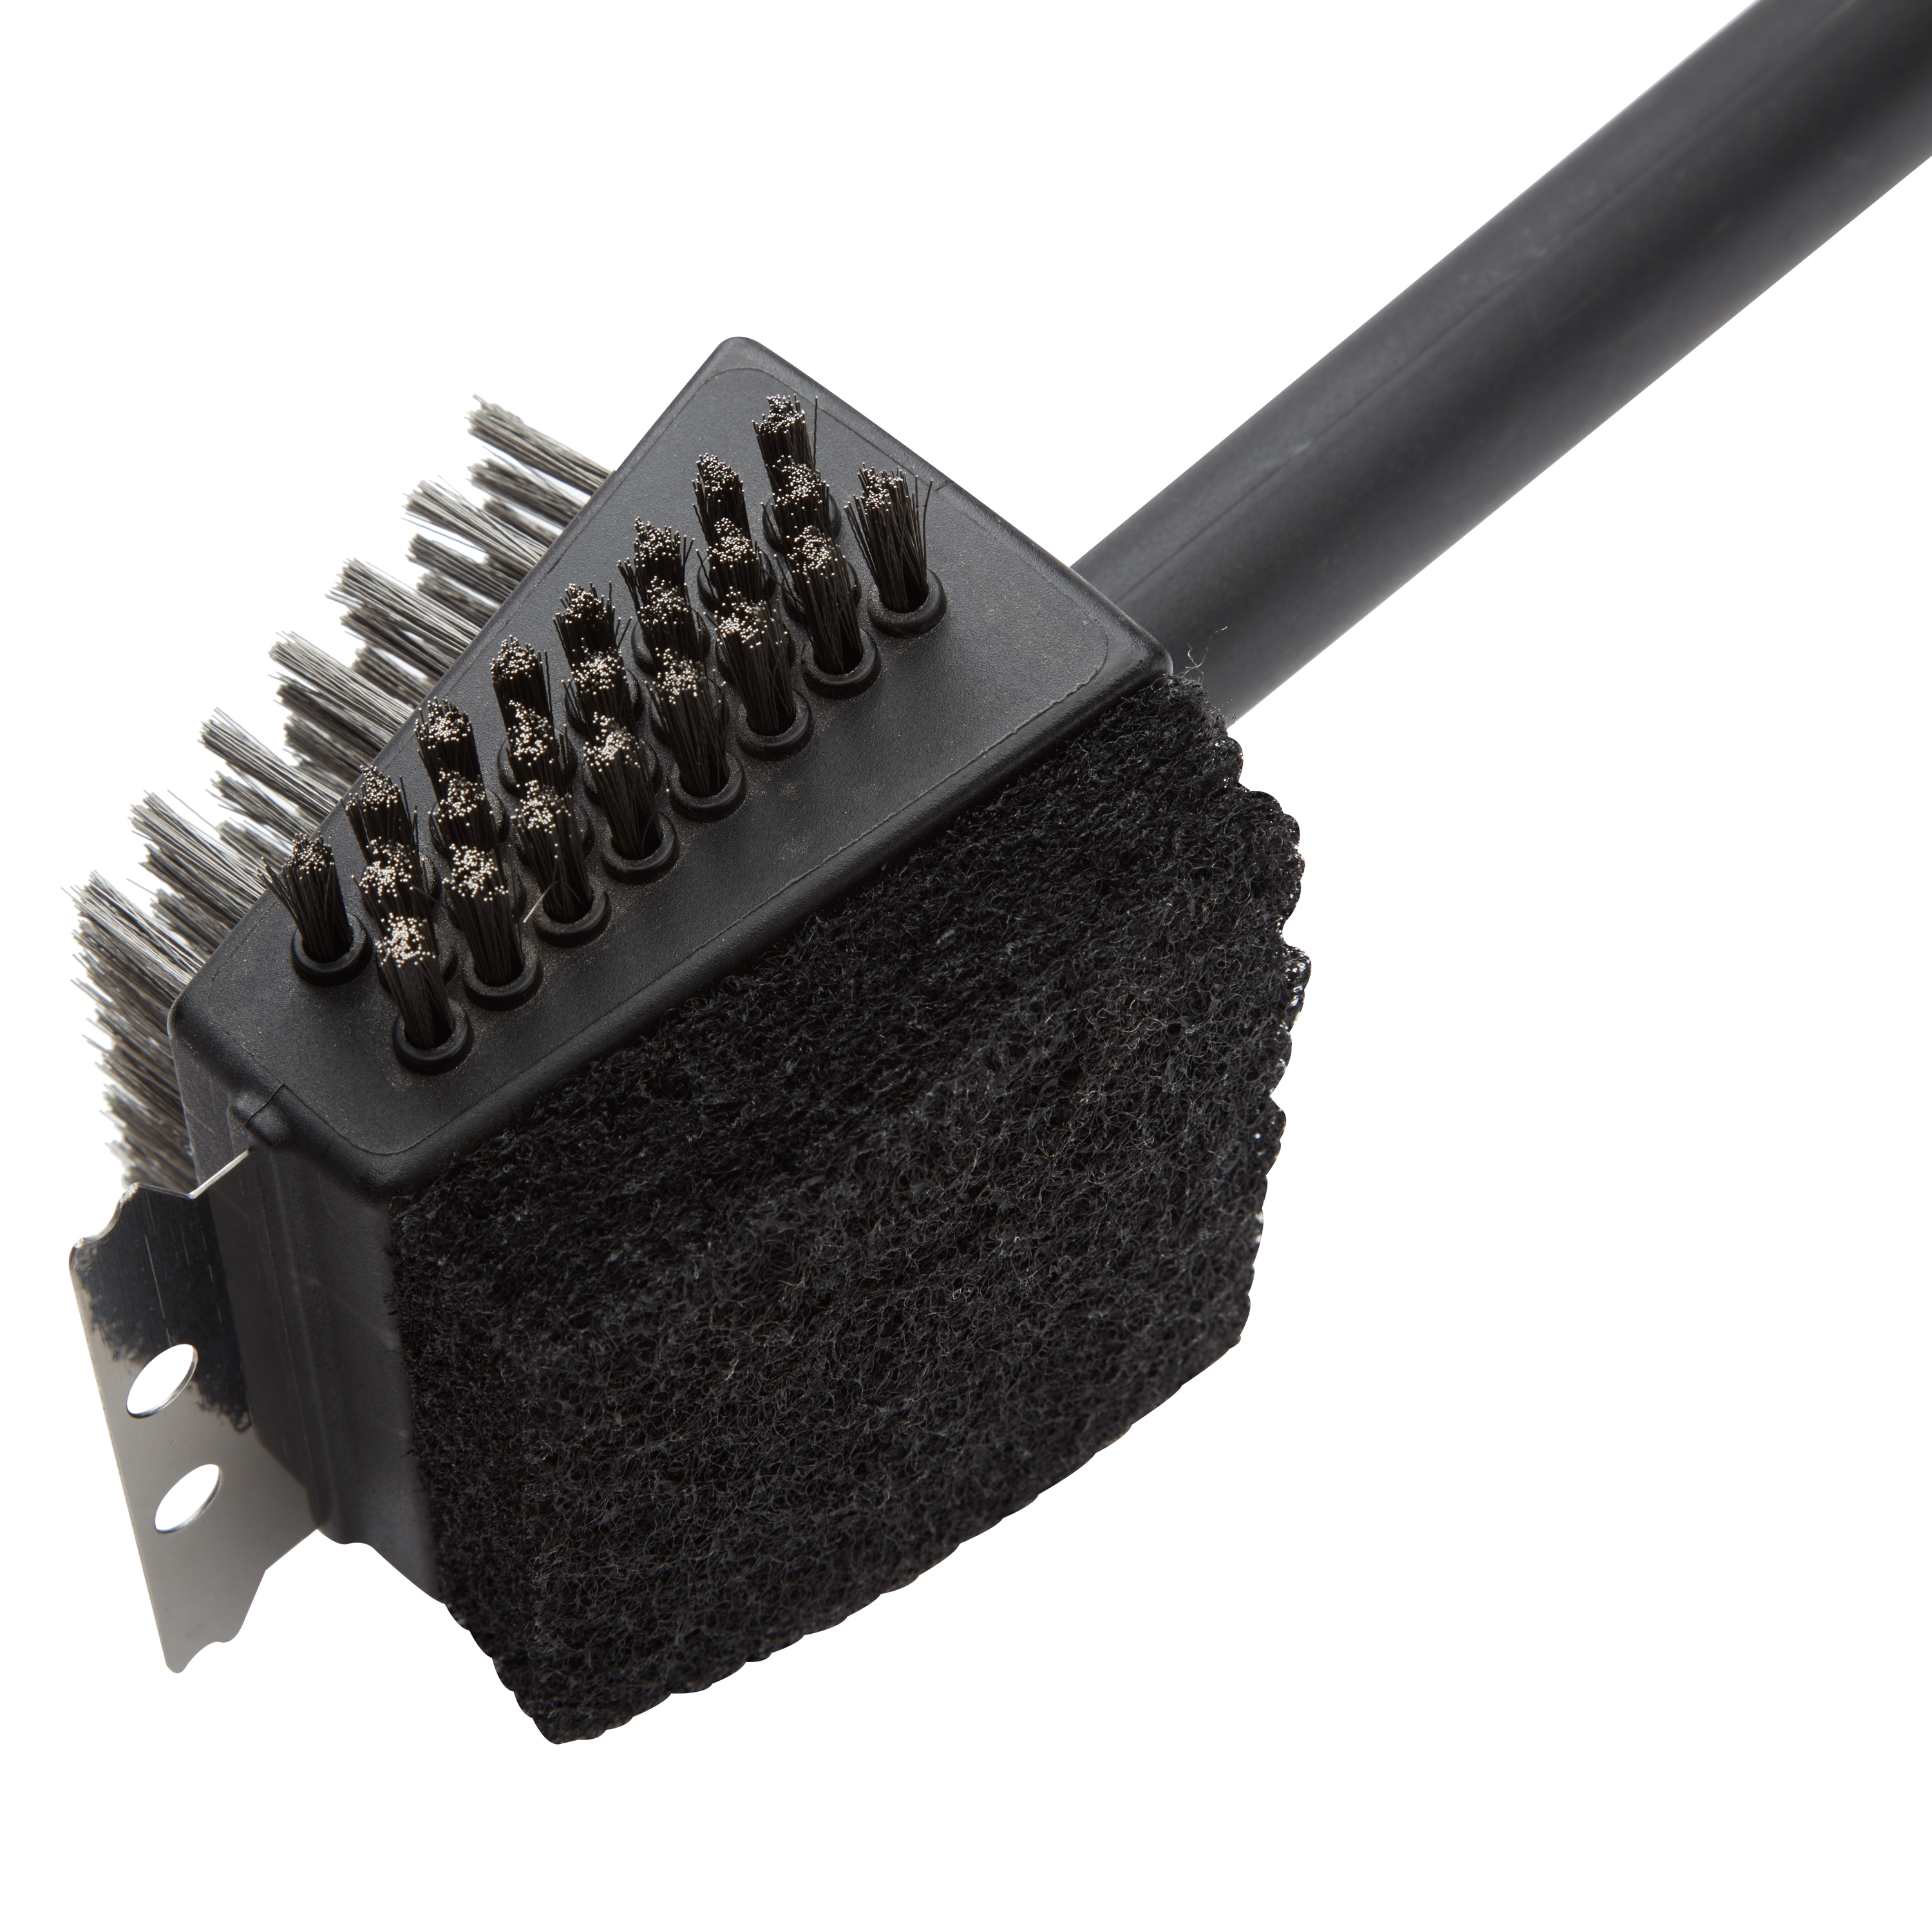 Bbq Cleaning Steel Brush, 3 In 1 Stainless Steel Right Angle Wire